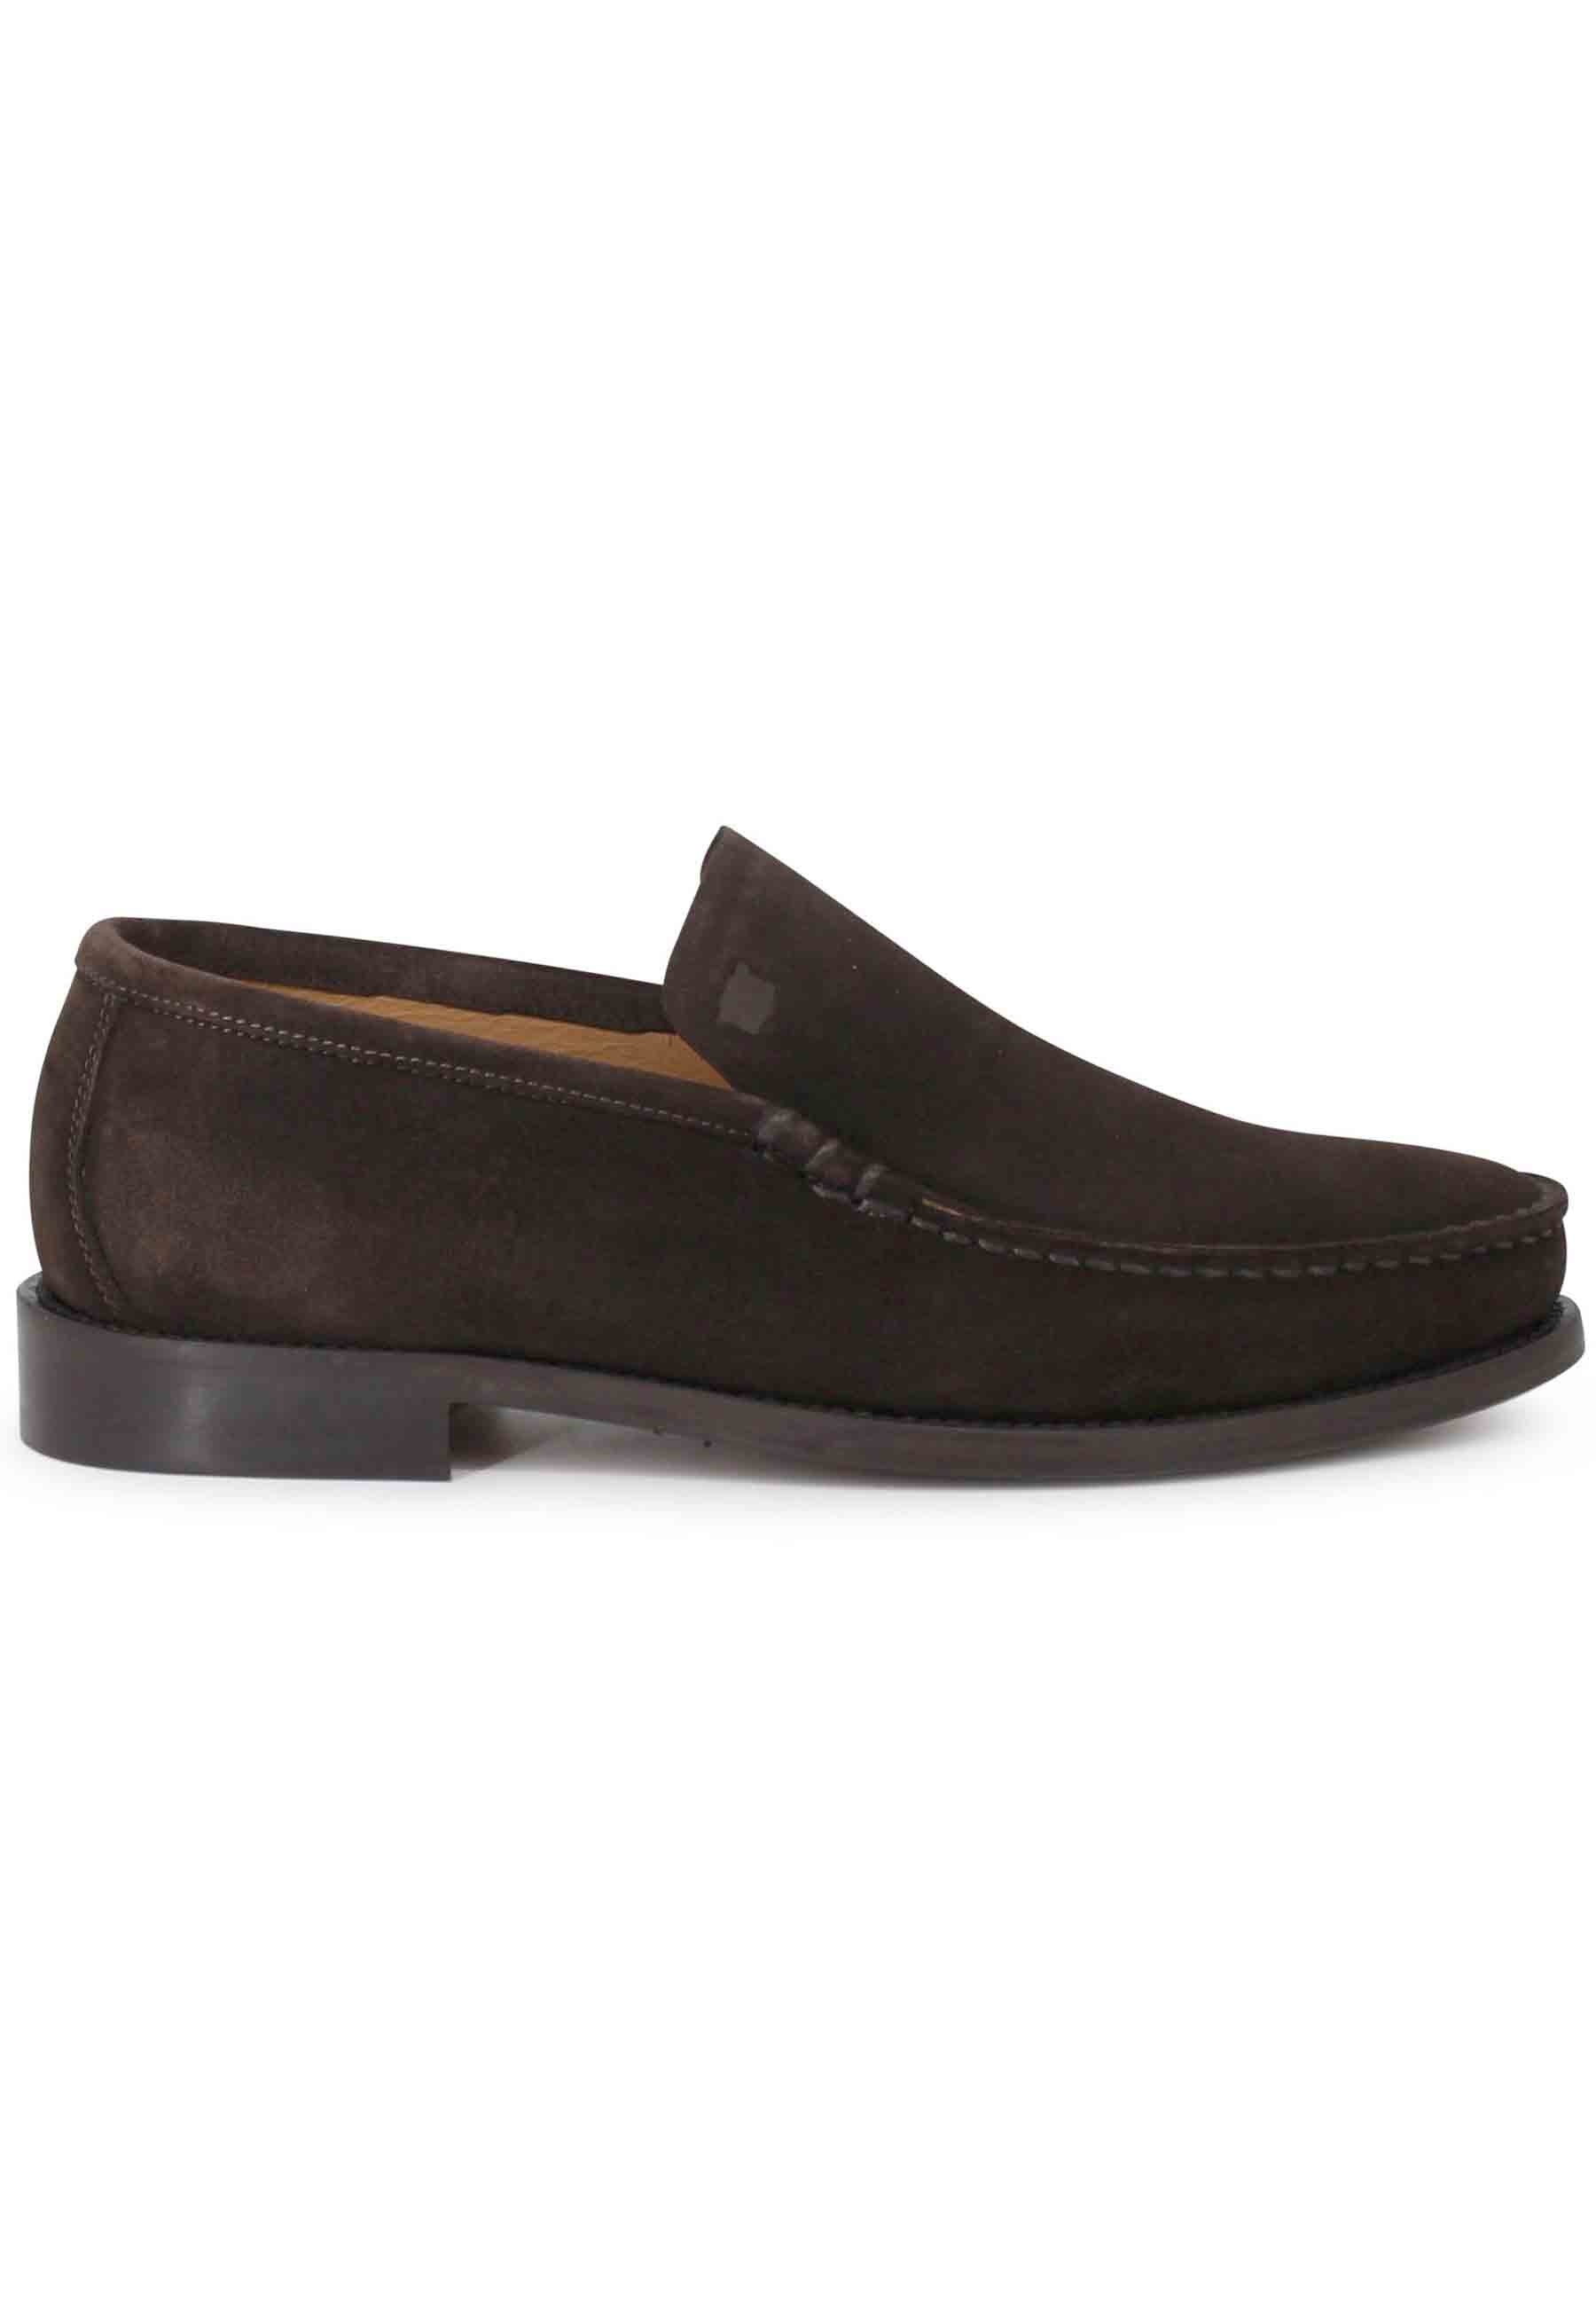 Men's brown suede loafers with smooth flap and stitched leather sole